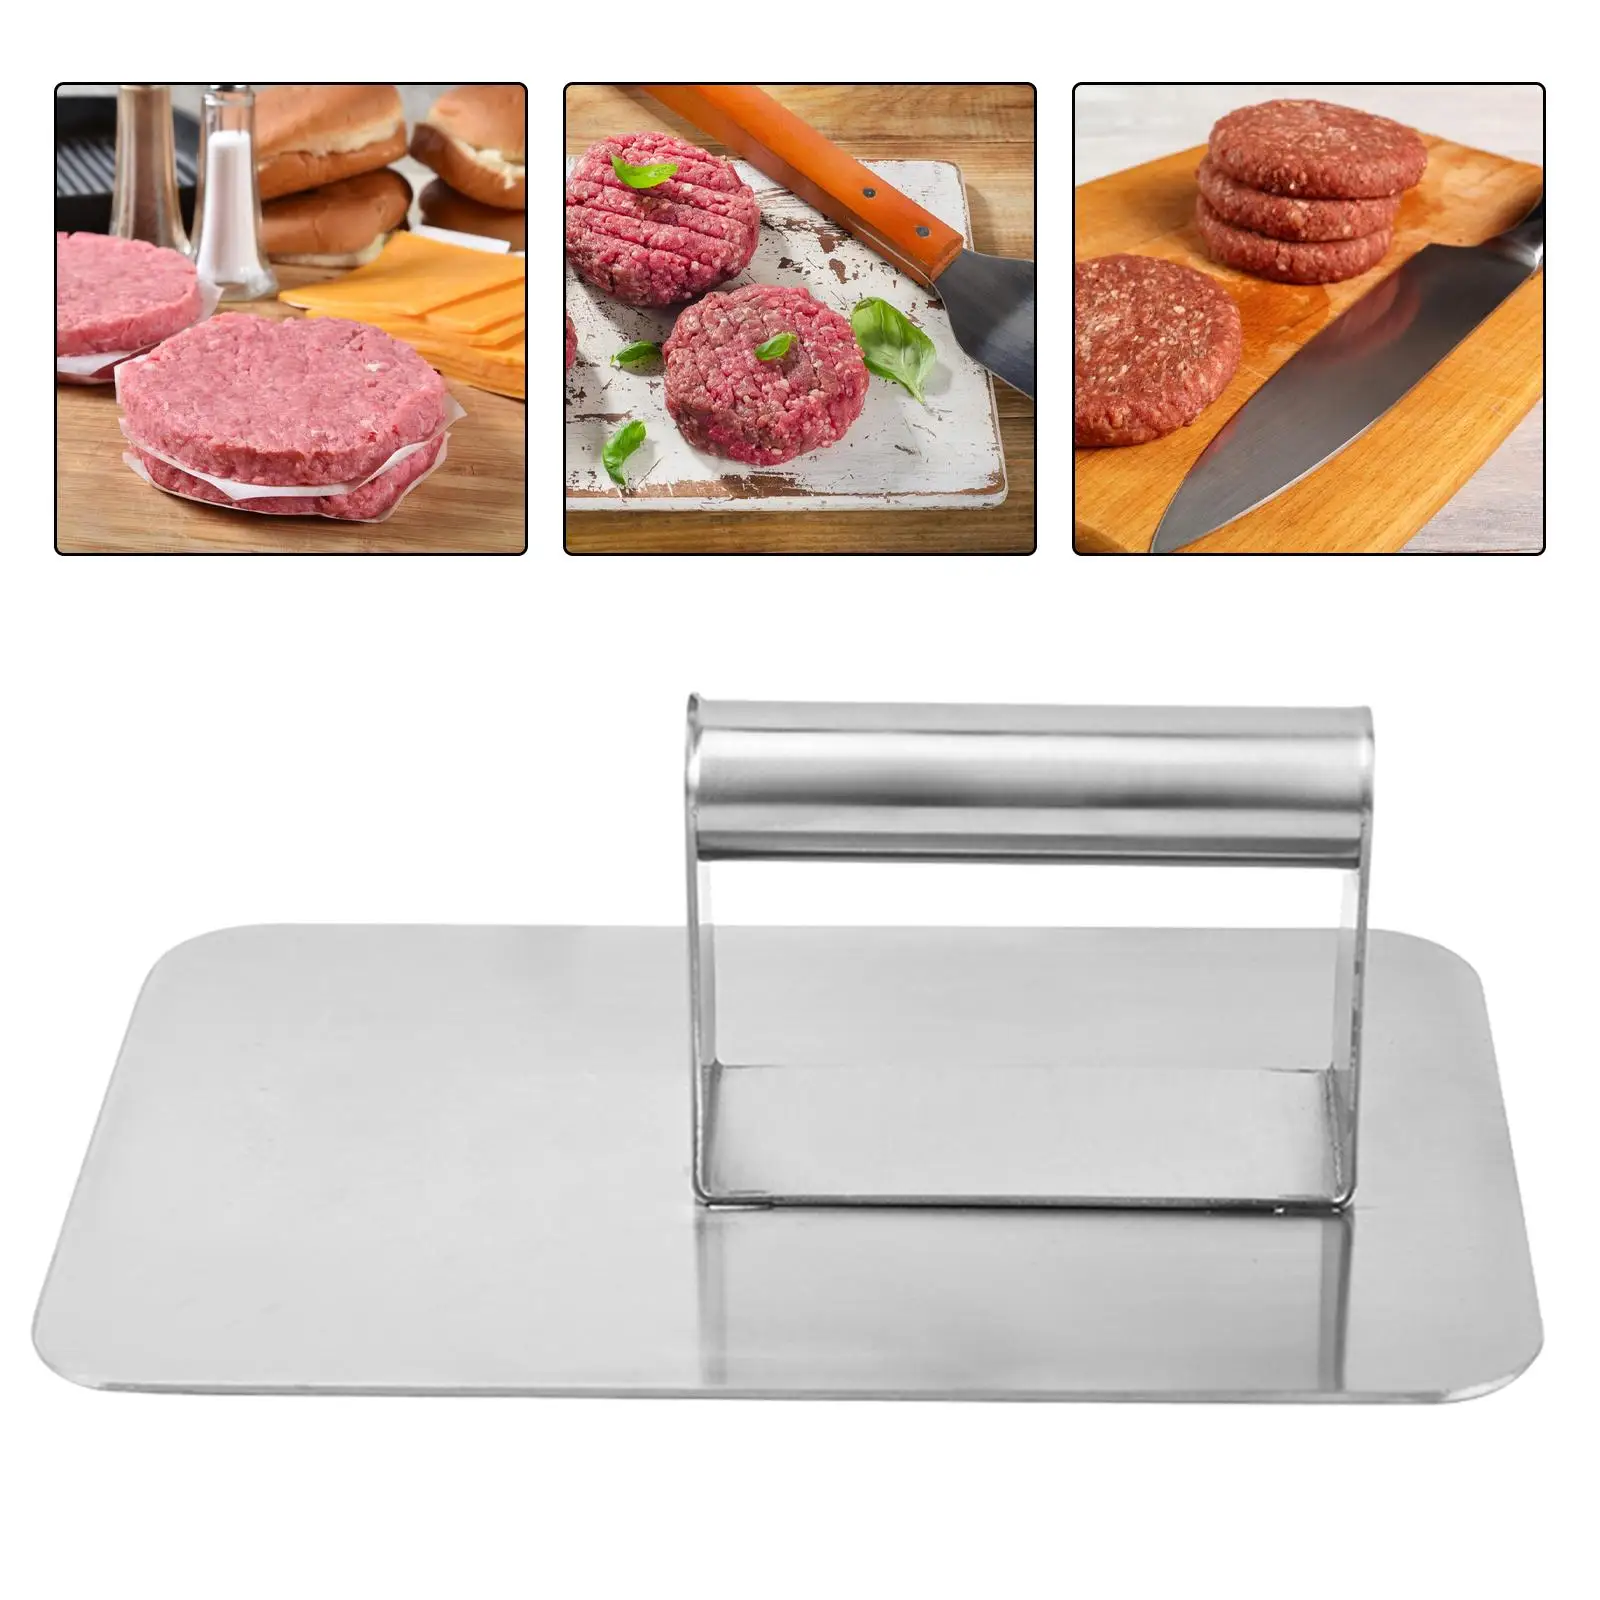 Burger Press Hamburger Press Hamburger Patty Maker Kitchen Meat Press Burger Smasher for Grill BBQ Cooking Steak Making Flat Top